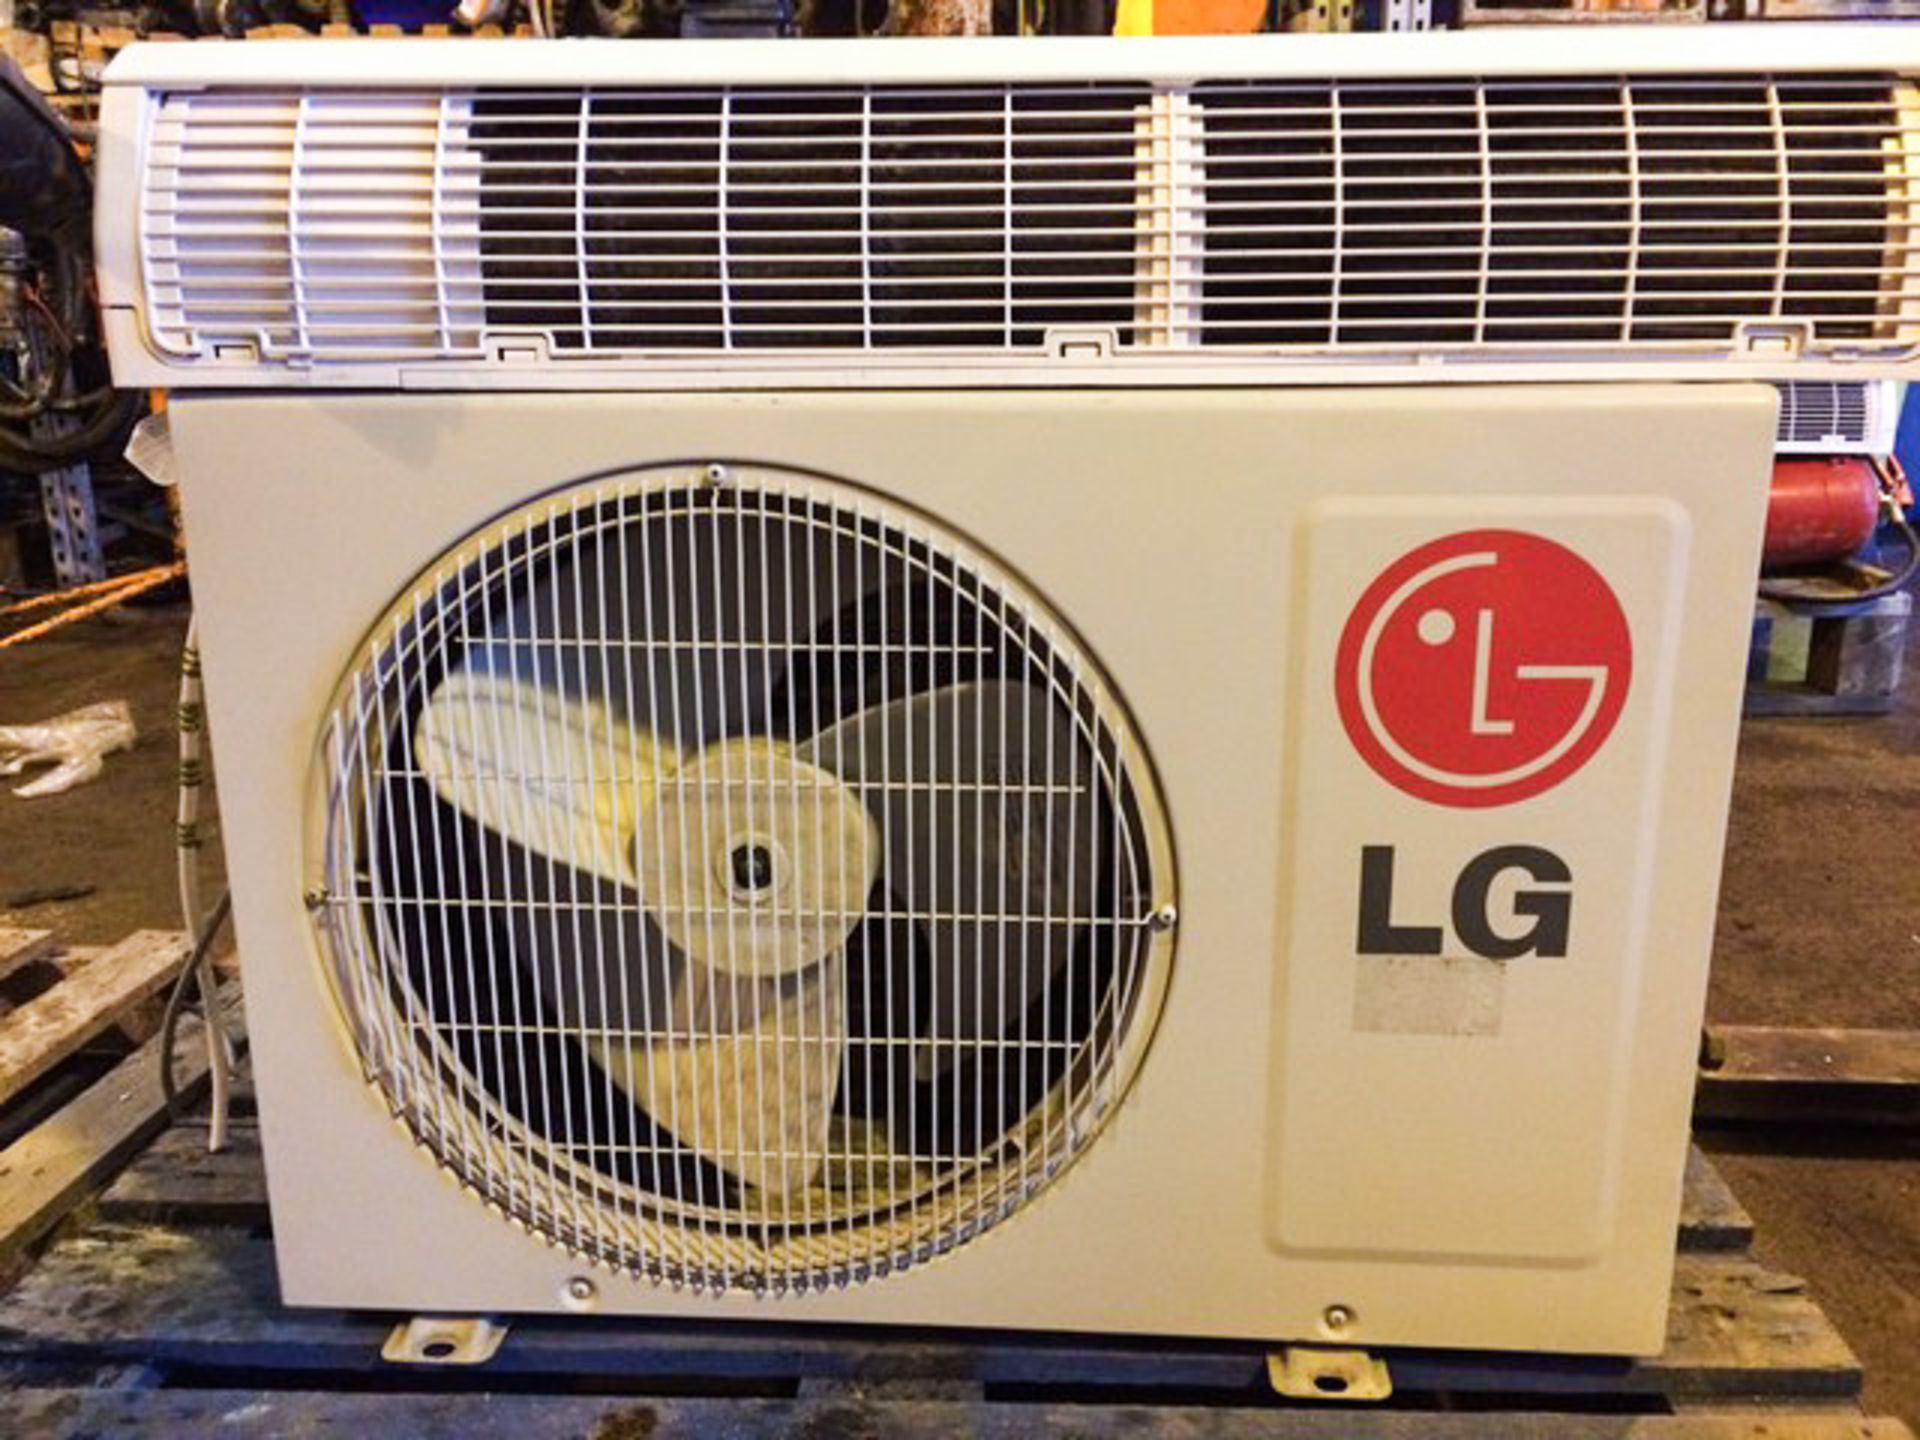 4 X LG AIR CONDITIONING UNITS** SOLD FROM & LOCATED AT BALLACHULISH PH49 4JQ VIEWING BY APPOINTMENT